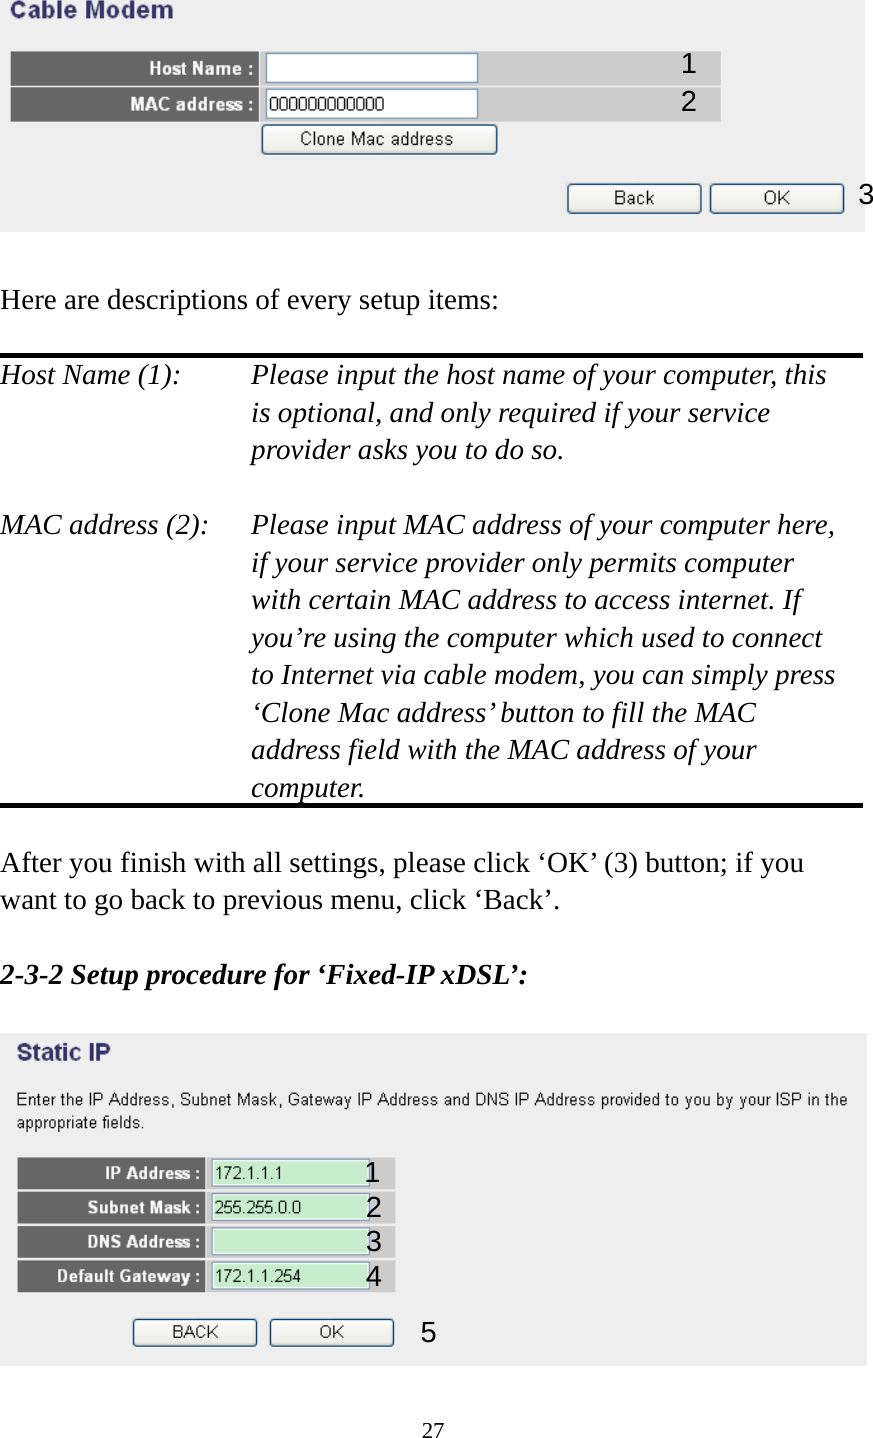 27    Here are descriptions of every setup items:  Host Name (1):    Please input the host name of your computer, this is optional, and only required if your service provider asks you to do so.    MAC address (2):    Please input MAC address of your computer here, if your service provider only permits computer with certain MAC address to access internet. If you’re using the computer which used to connect to Internet via cable modem, you can simply press ‘Clone Mac address’ button to fill the MAC address field with the MAC address of your computer.  After you finish with all settings, please click ‘OK’ (3) button; if you want to go back to previous menu, click ‘Back’.    2-3-2 Setup procedure for ‘Fixed-IP xDSL’:   1 2 3 1 2 3 4 5 